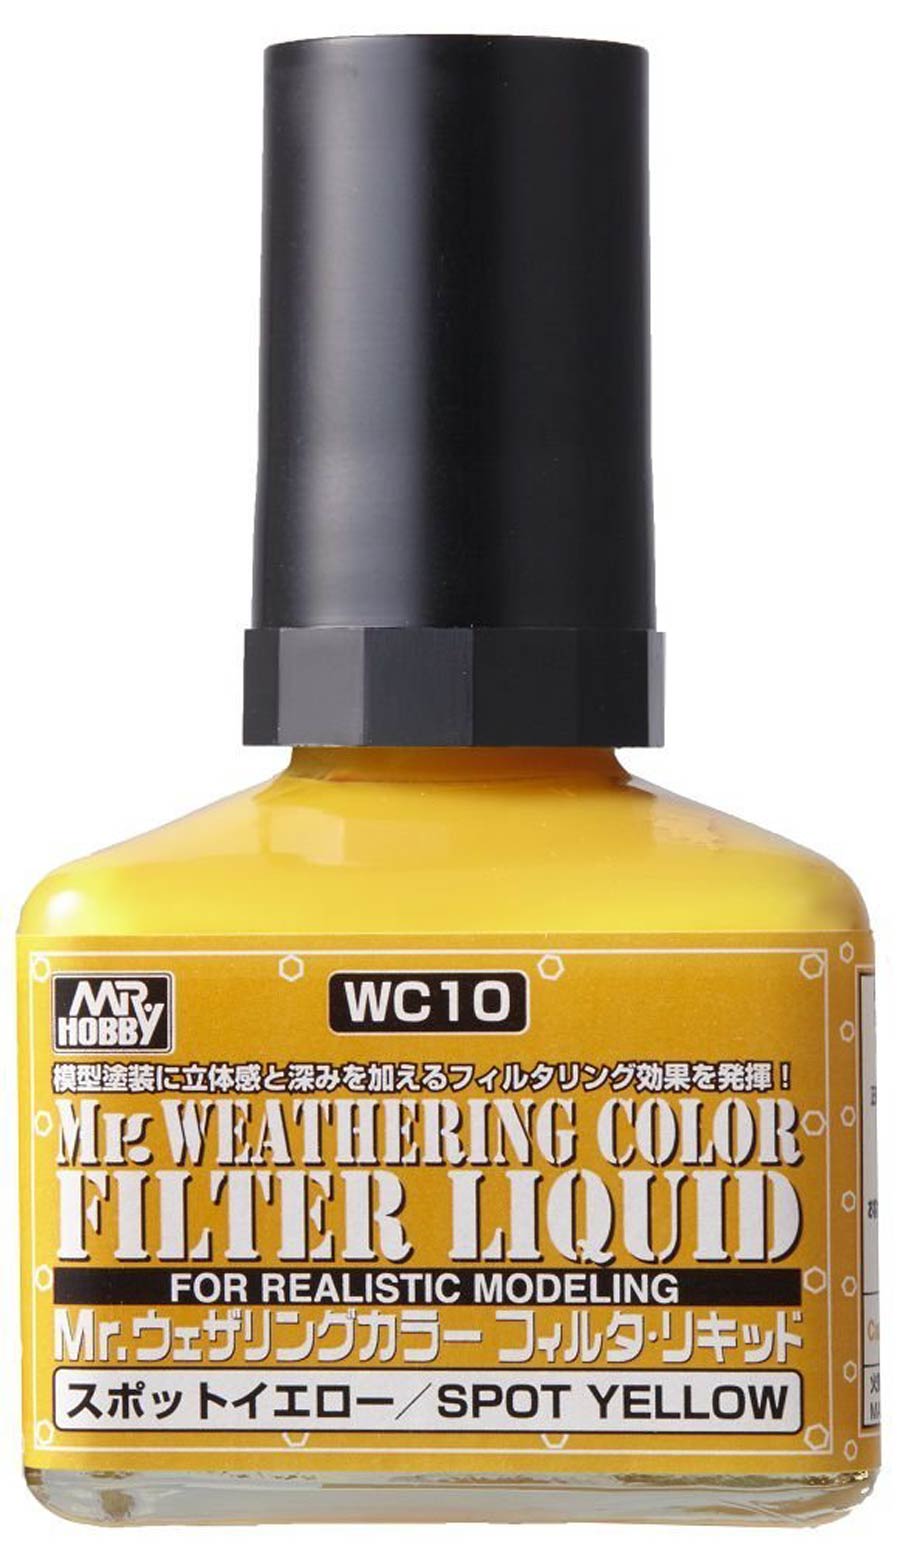 Mr. Weathering Color Paint -  Box Of 6 Units - WC10 Filter Liquid Spot Yellow Bottle